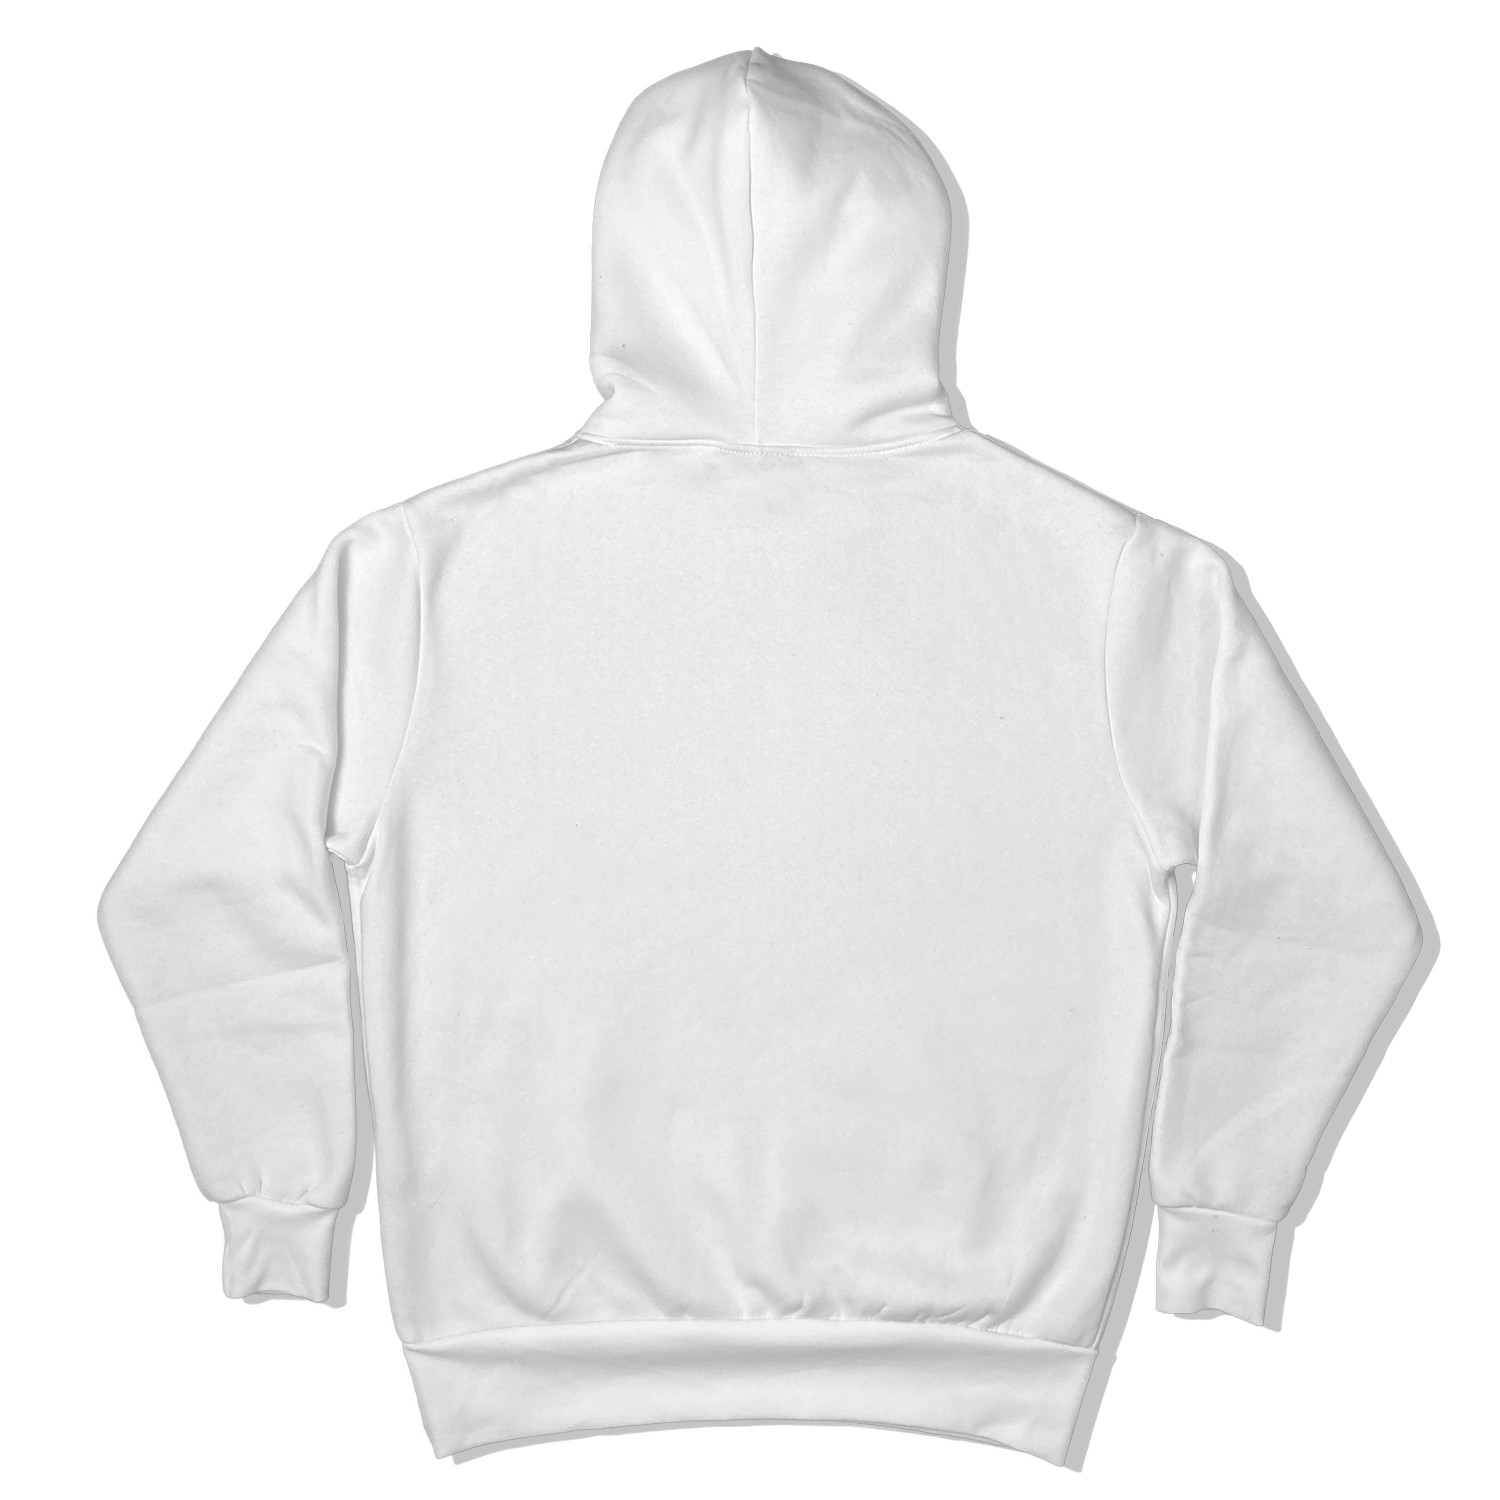 Fire Walk With Me White — Hoodie